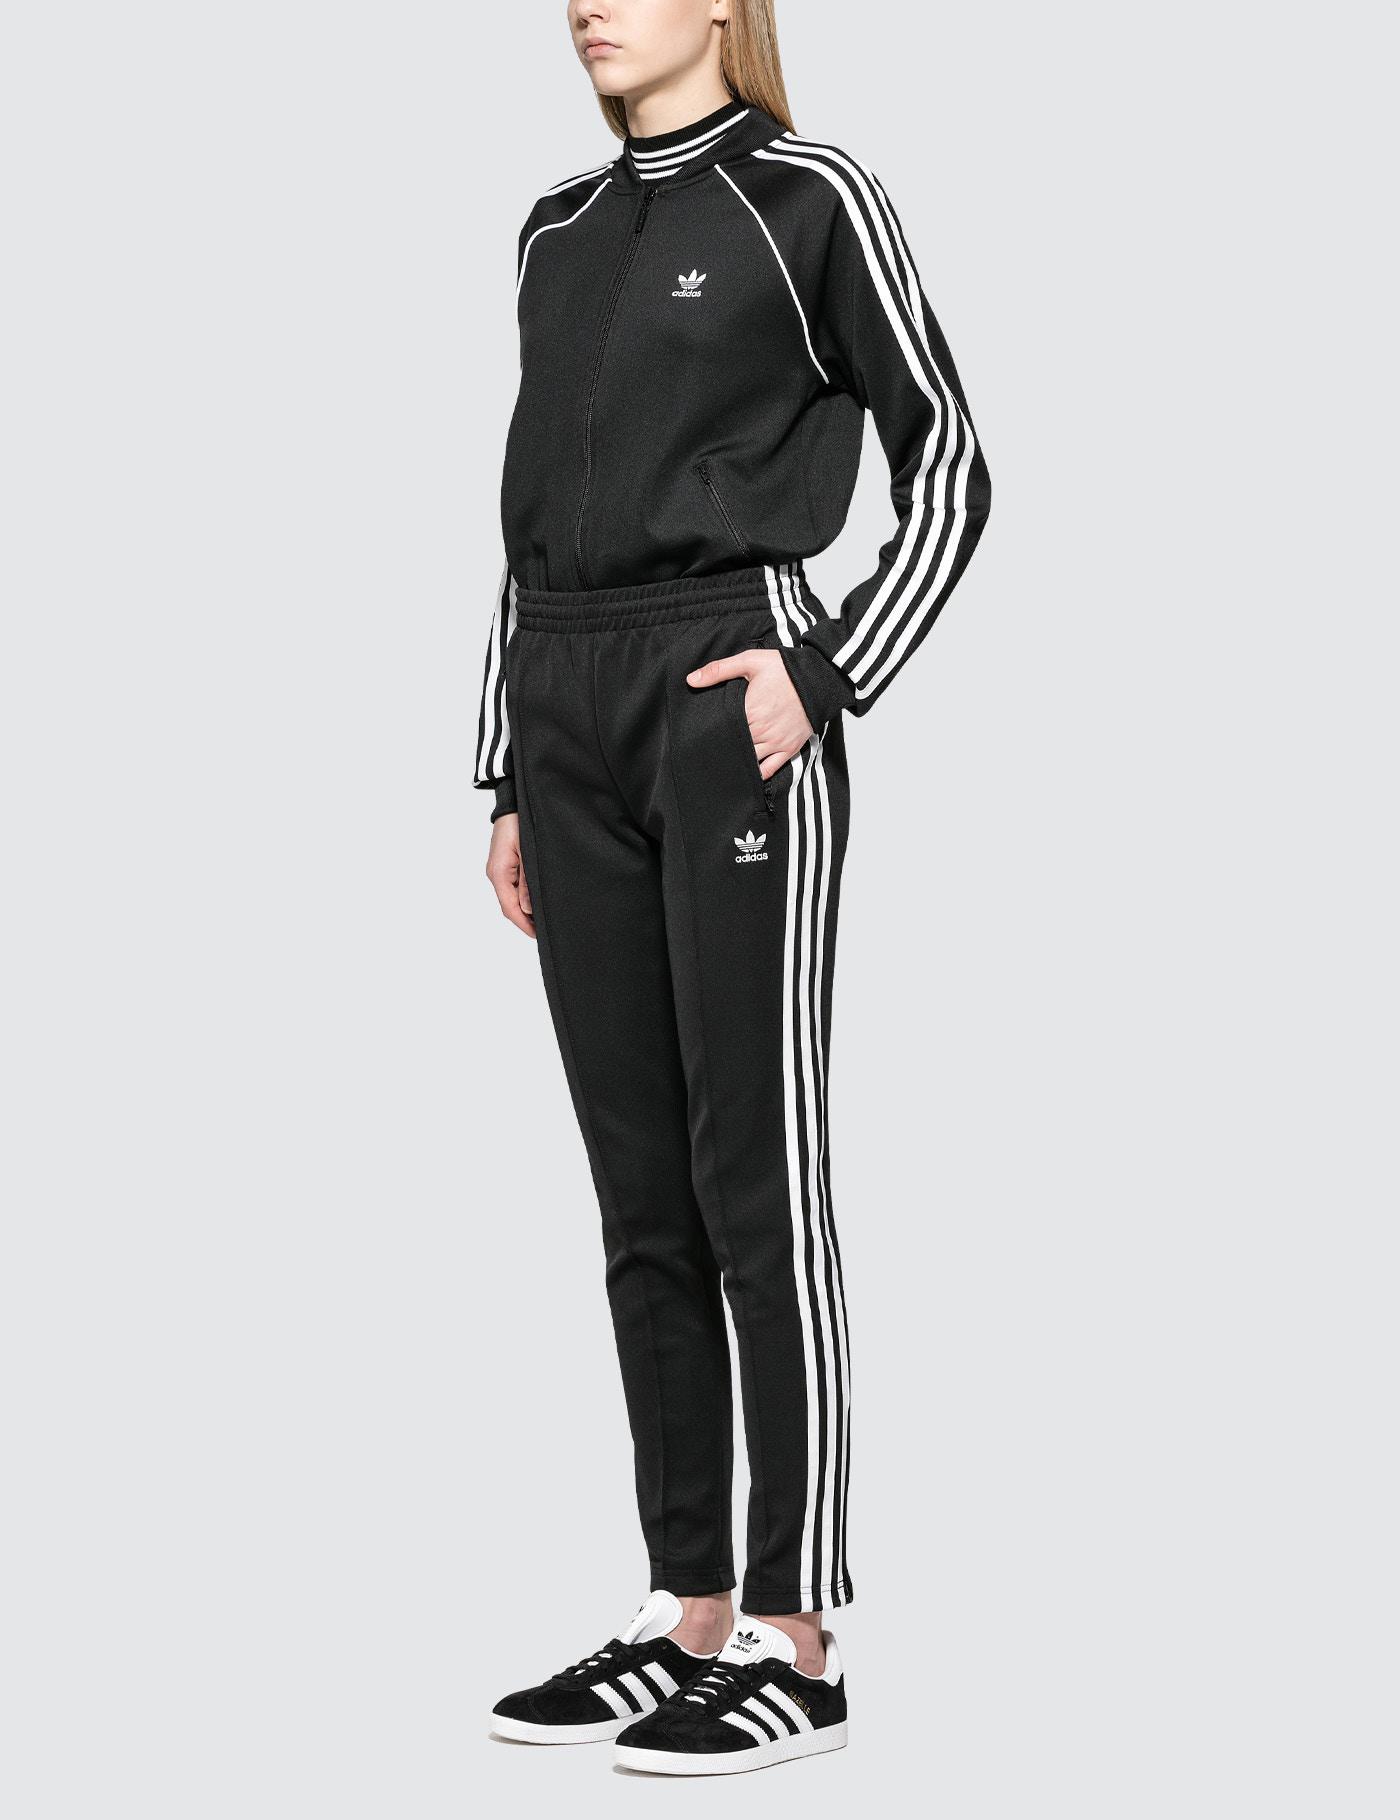 adidas Originals Synthetic Sst Tp in Black - Lyst